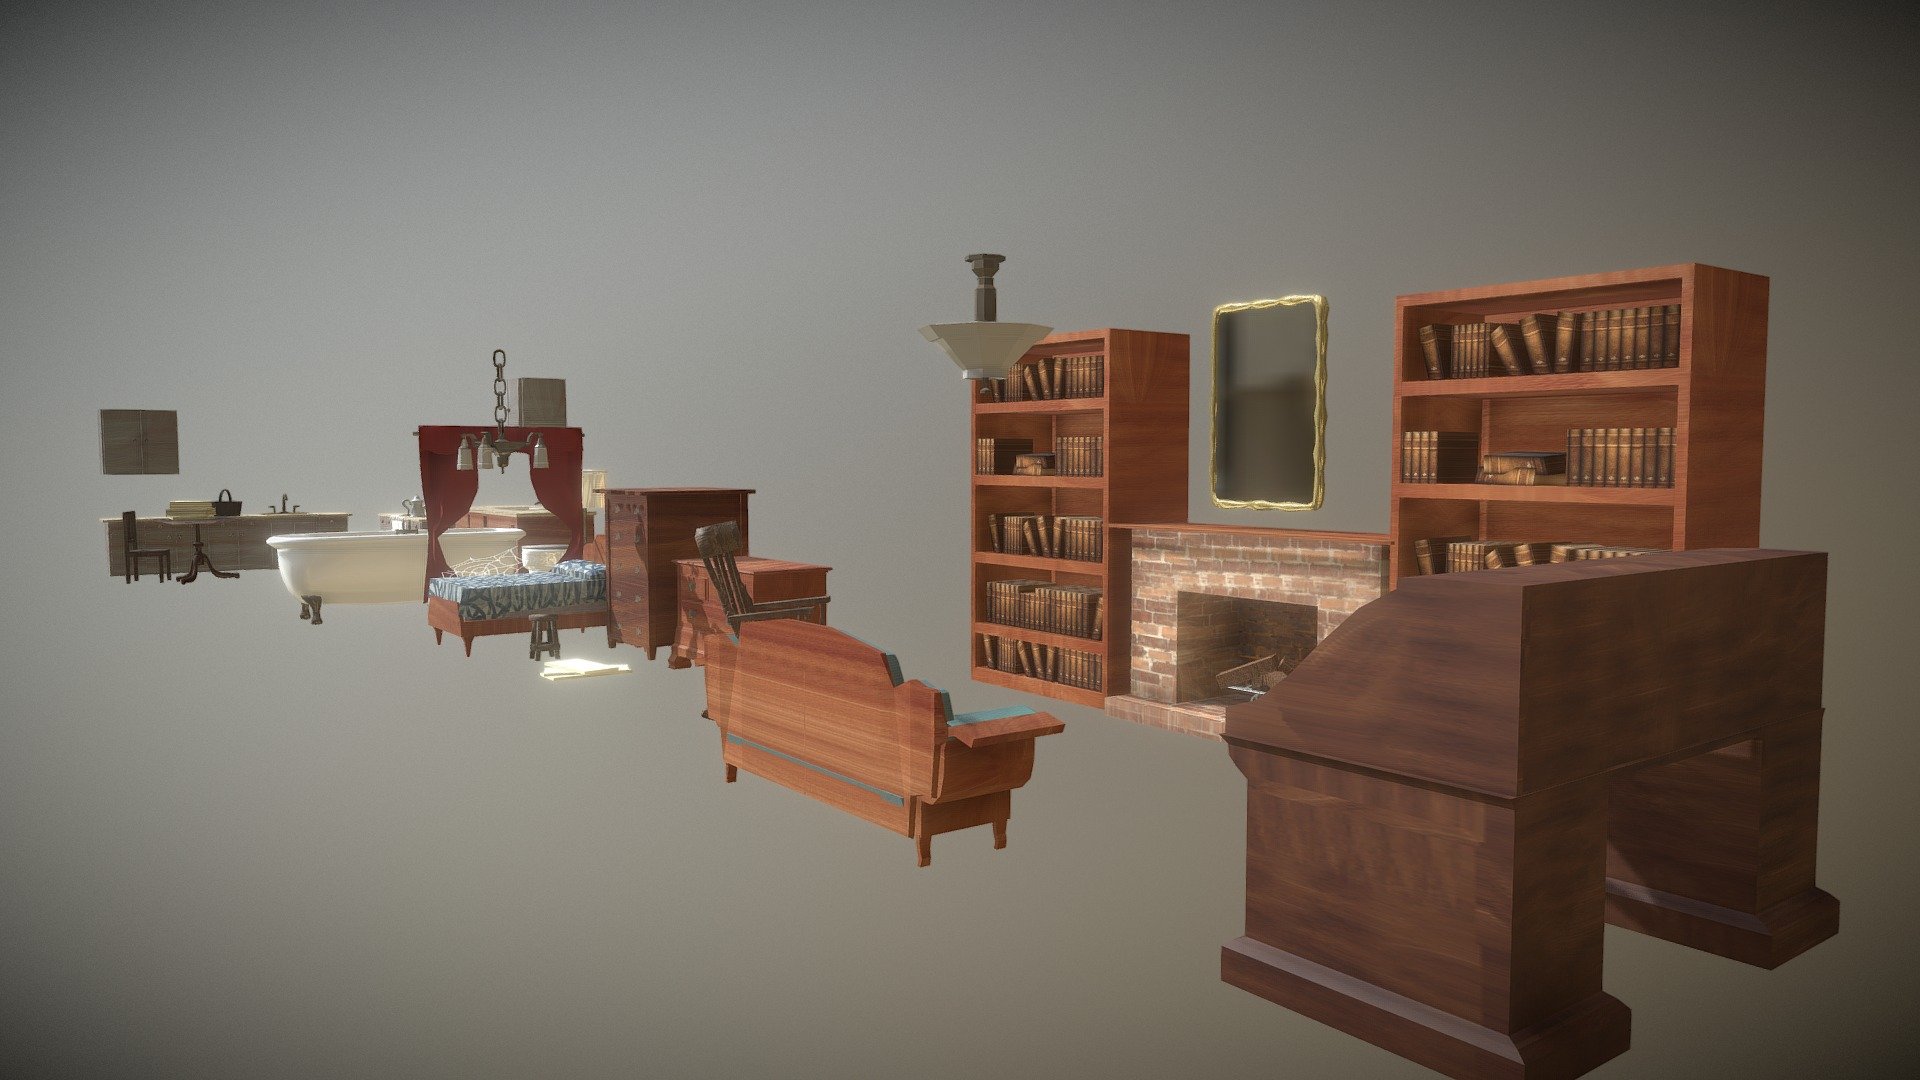 Build your interior scene with 46 Lowpoly, Interior Props ready for Virtual Reality.

This pack Contains 
50 Materials
143 (2048 * 2048) Textures.

4 Chair Variants.(From 160 - 1,163 Tris)

2 Stool Variants (From  160 - 168 Tris)

3 Table Variants (From 910 - 1160 Tris)

1 Office Desk, With Openable Drawers (1,192 Tris)

3 Pot Variants (From 100 - 427 Tris)

2 Light Fixture Variants (From 360 - 1,408 Tris)

3 Paper Stack Variants (From 8 - 24 Tris)

2 Spider Web Variants (4 Tris)

3 Mirror Variants (From 281 - 311 Tris)

4 Book Set Variants (From 8 - 54 Tris)

2 Drawer Variants (From 136 - 650 Tris)

2 Dresser Variants (From 388 - 1776 Tris)

2 Curtain Variants (604 Tris)

1 Toilet Variant (1528 Tris)

1 Bathtub Variant (978 Tris)

1 Bathroom Counter Variant (380 Tris)

6 Kitchen Counter Variants (76 - 442)

1 Stove Variant (2576 Tris)

1 Bed Variant (574 Tris)

1 Couch Variant (714 Tris)

1 Fire Log Variant (40 Tris)

1 Fireplace Variant (36 Tris)

1 Log Holder Variant (304 Tris)

1 Bookshelf (100 Tris) - Lowpoly Interior Props | VR Ready - 3D model by TheCGMaster 3d model